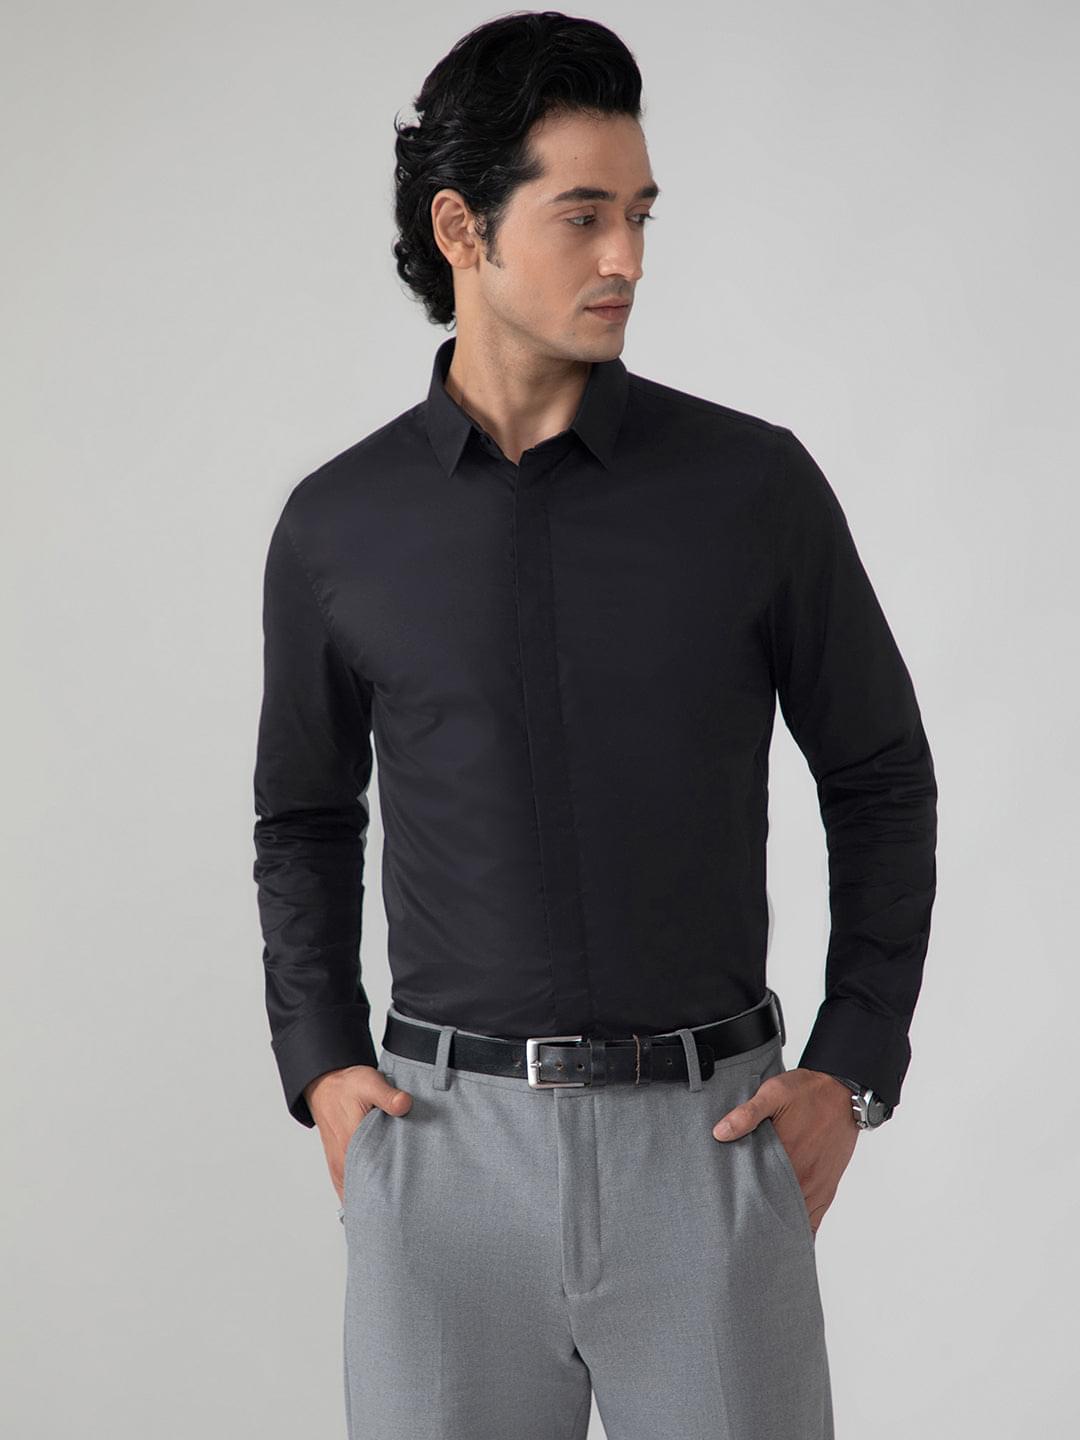 Satin Evening Shirt in Raven Black with Stretch - Slim Fit